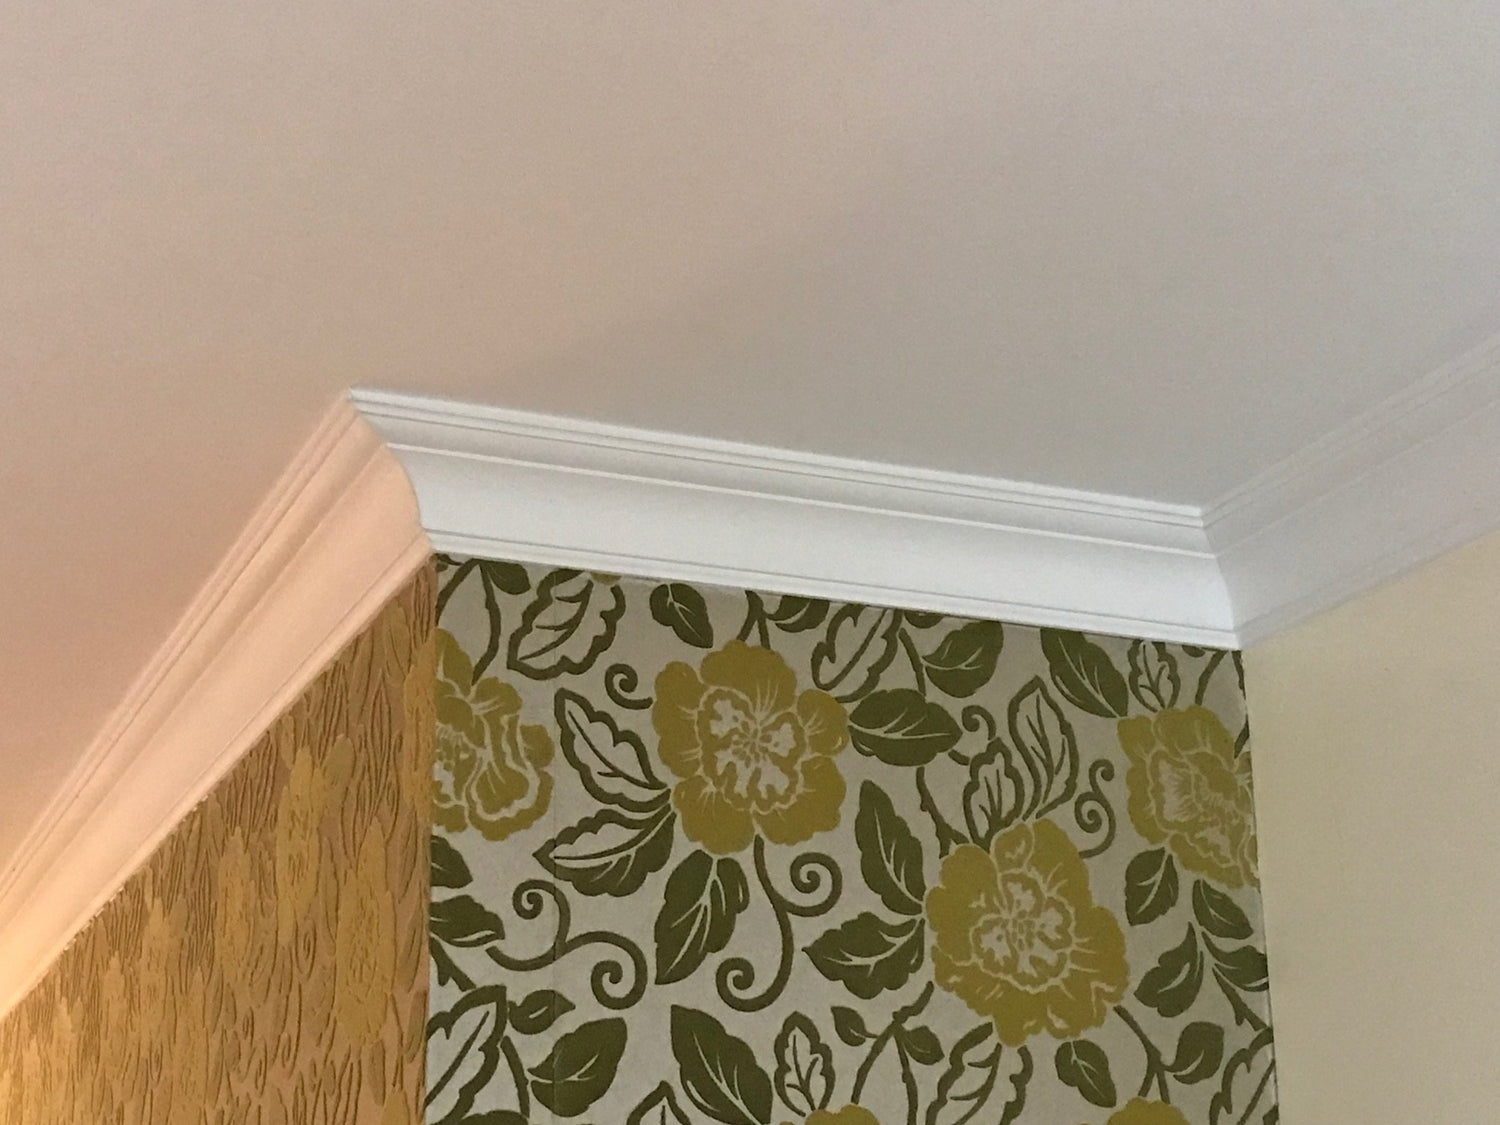 MD367 - Modern Coving installed above a green wallpaper